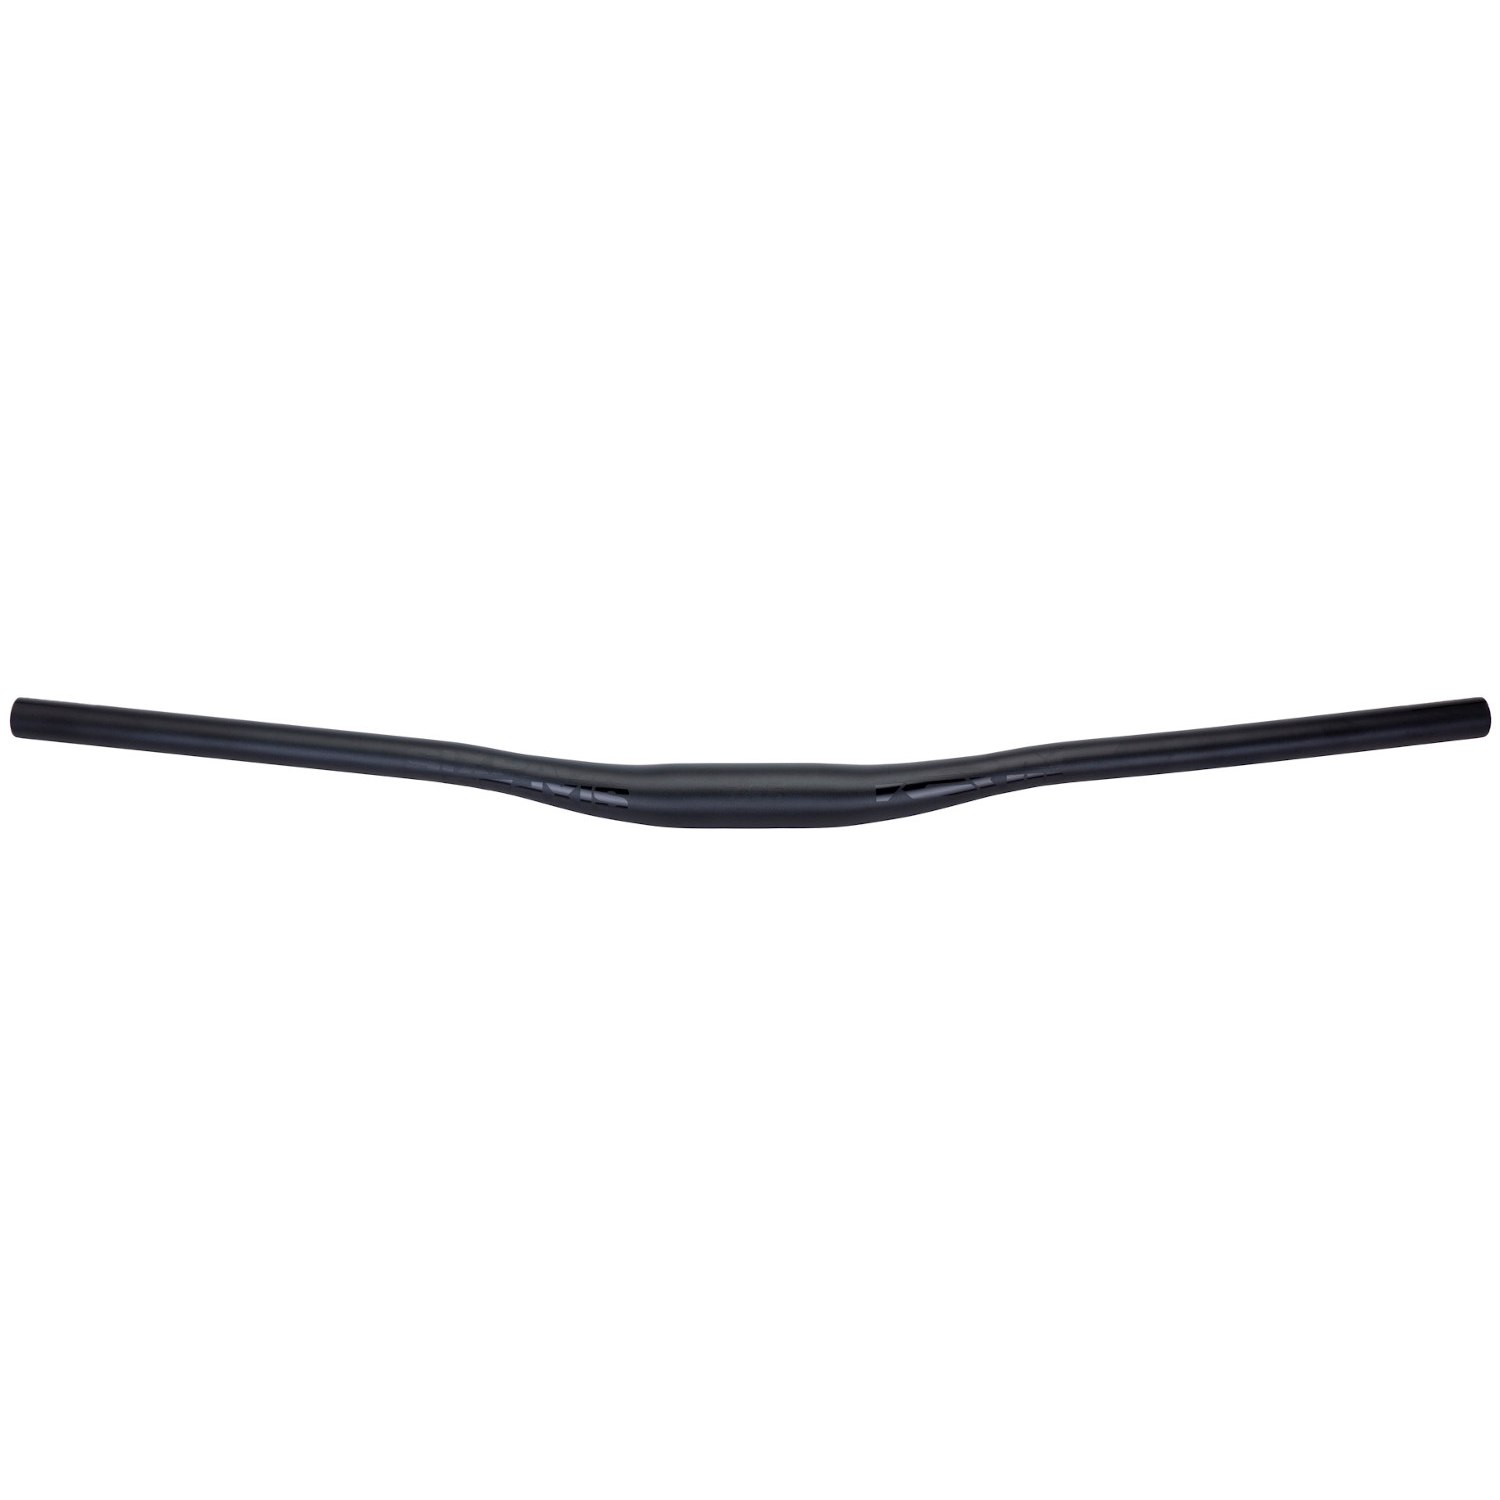 Picture of Sixpack Vertic785 35mm Handlebar - stealth black